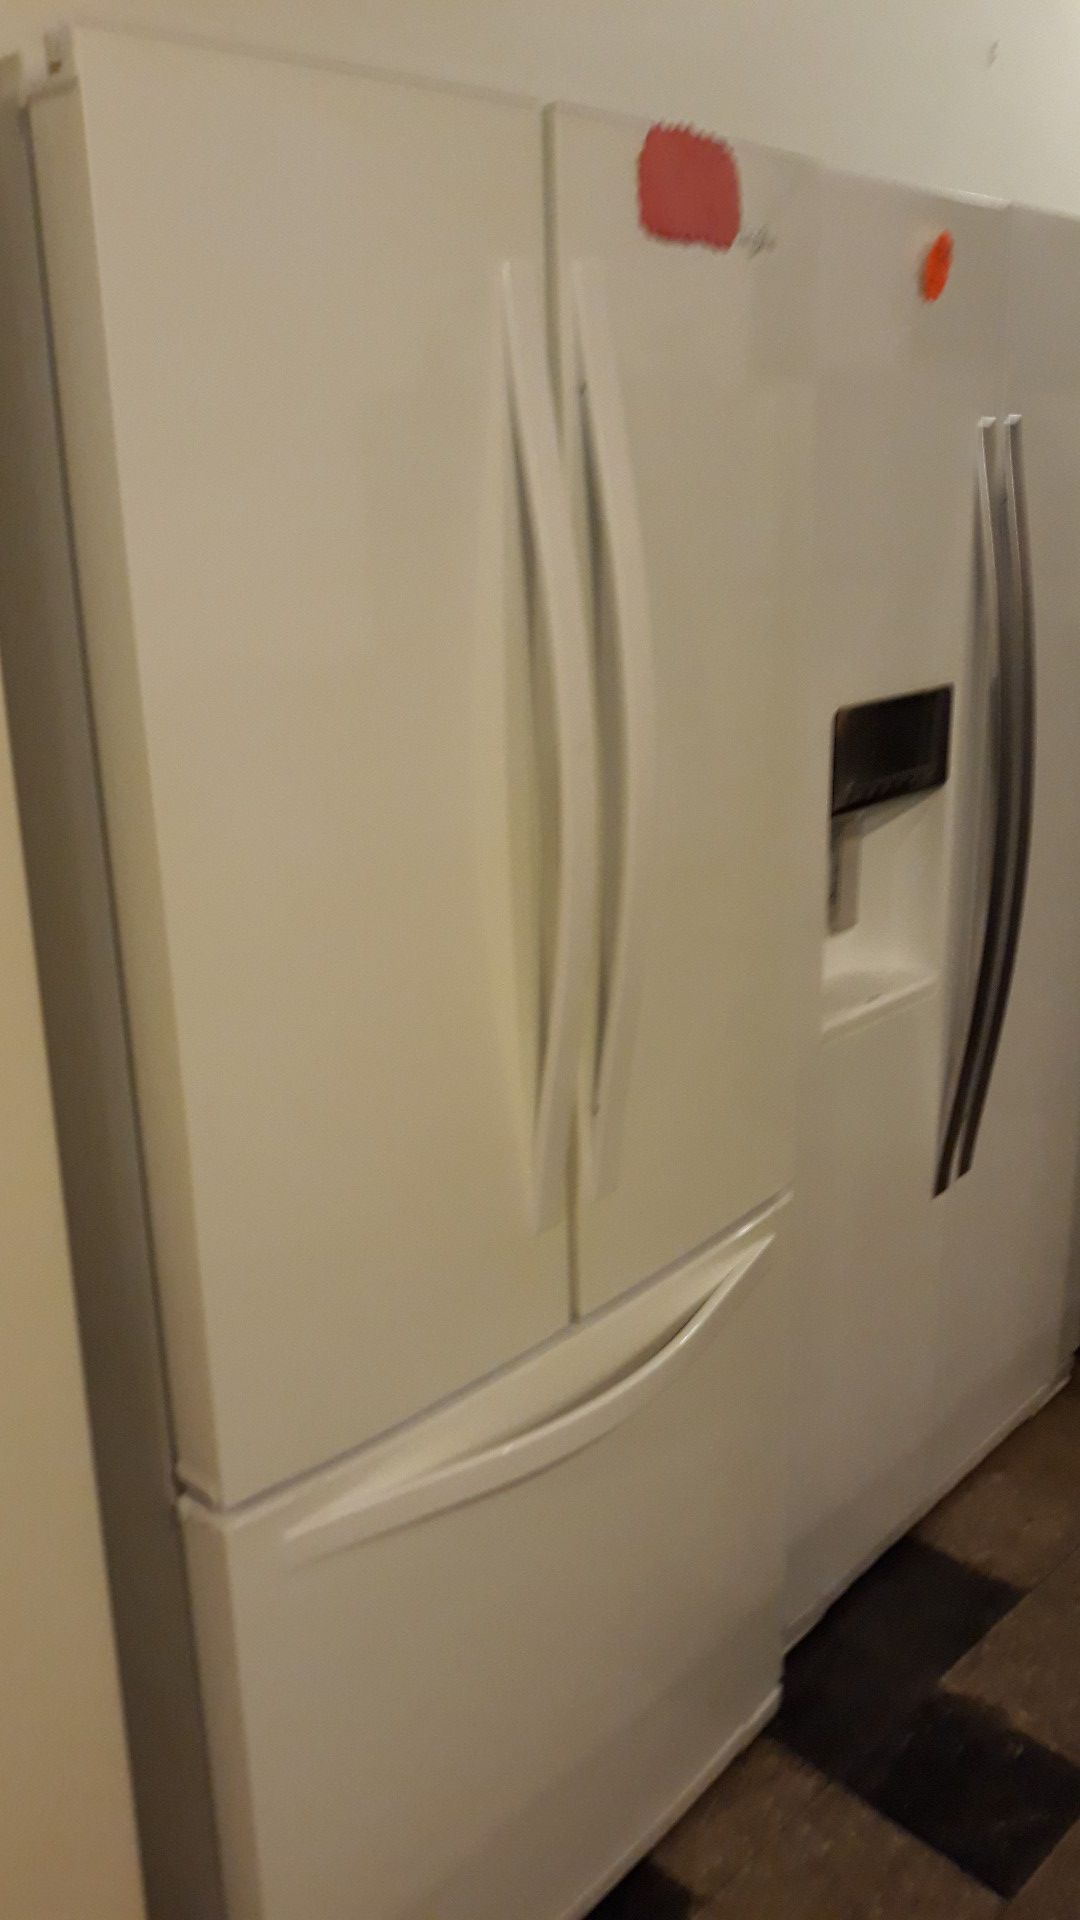 Whirlpool French doors excellent condition 4months warranty 30"